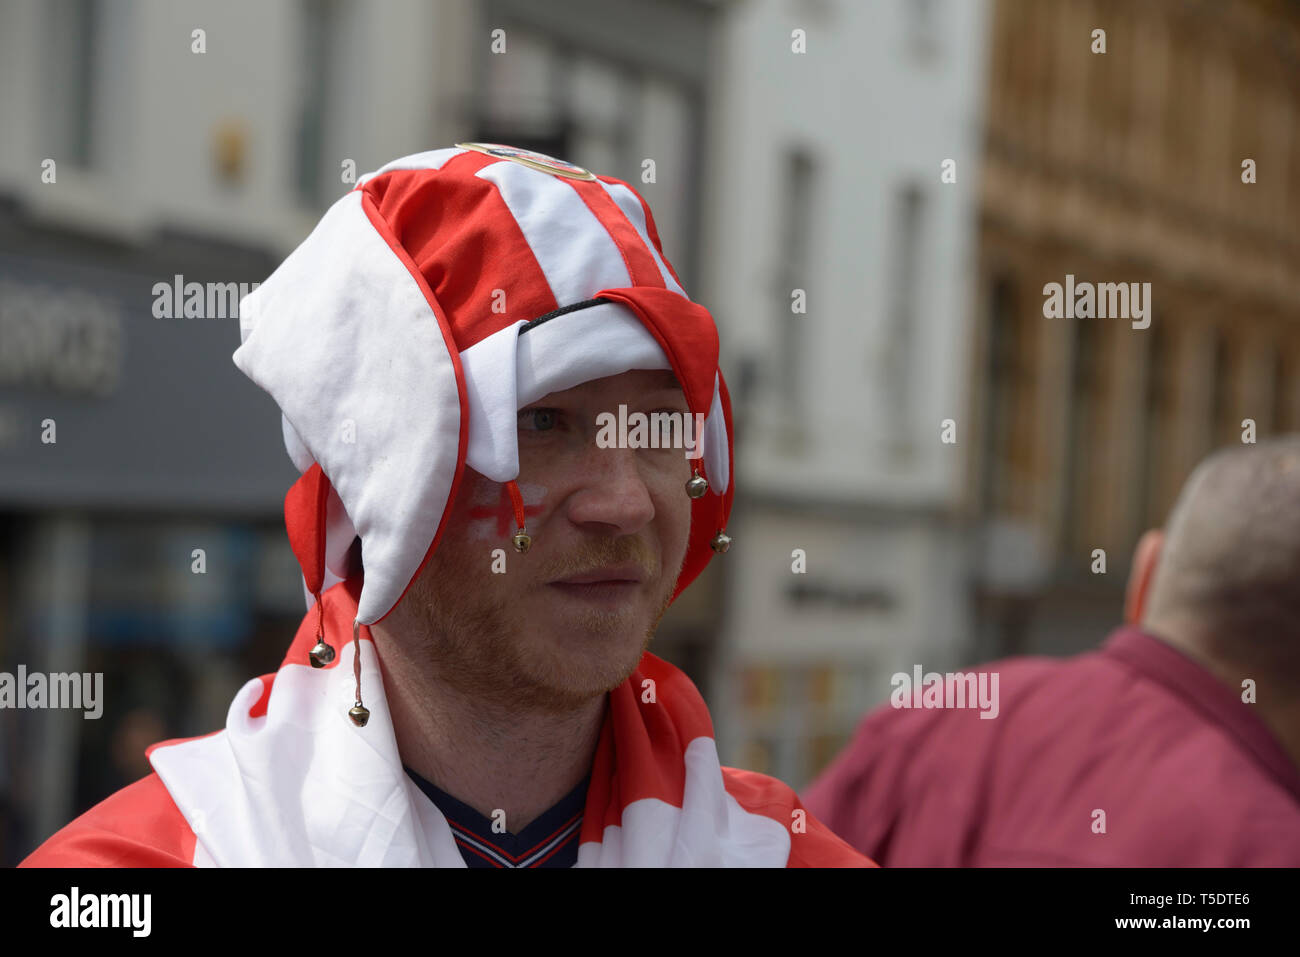 Man with Red & white headgear, at St. George's Day celebration, Nottingham, England. Stock Photo